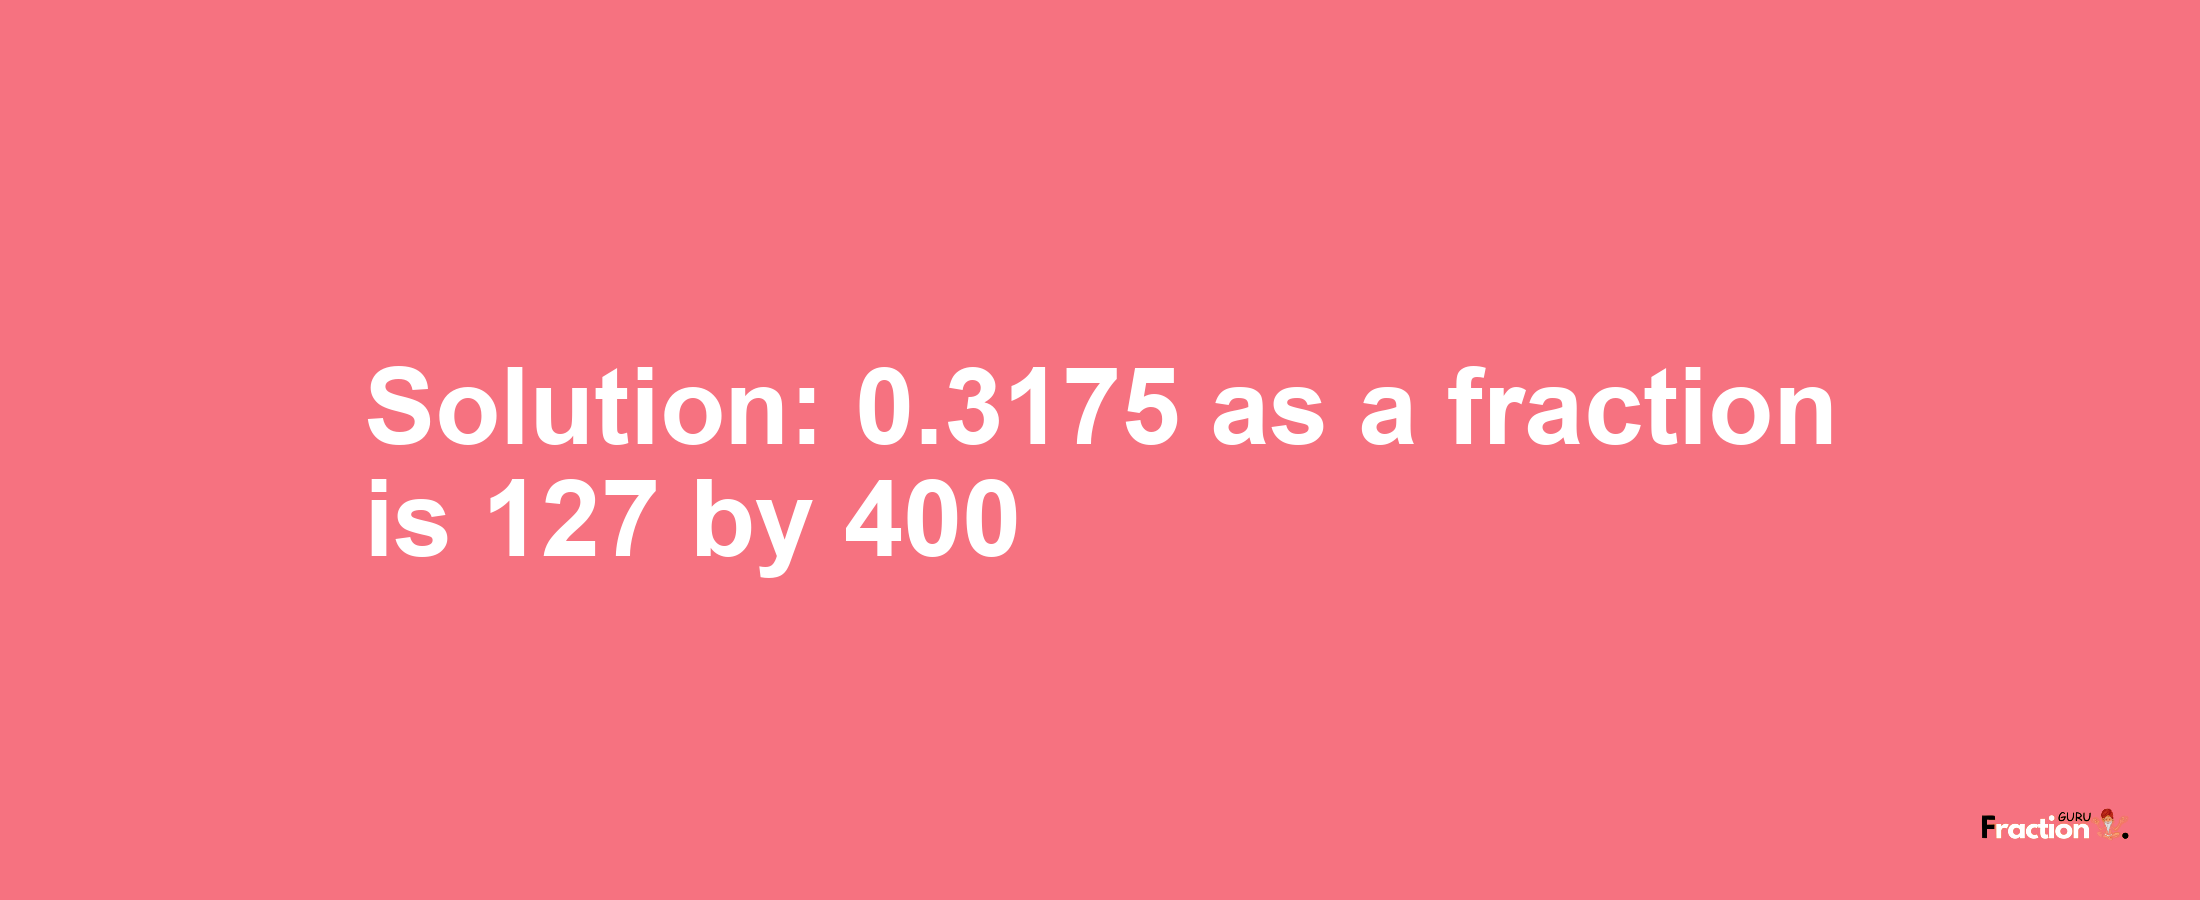 Solution:0.3175 as a fraction is 127/400